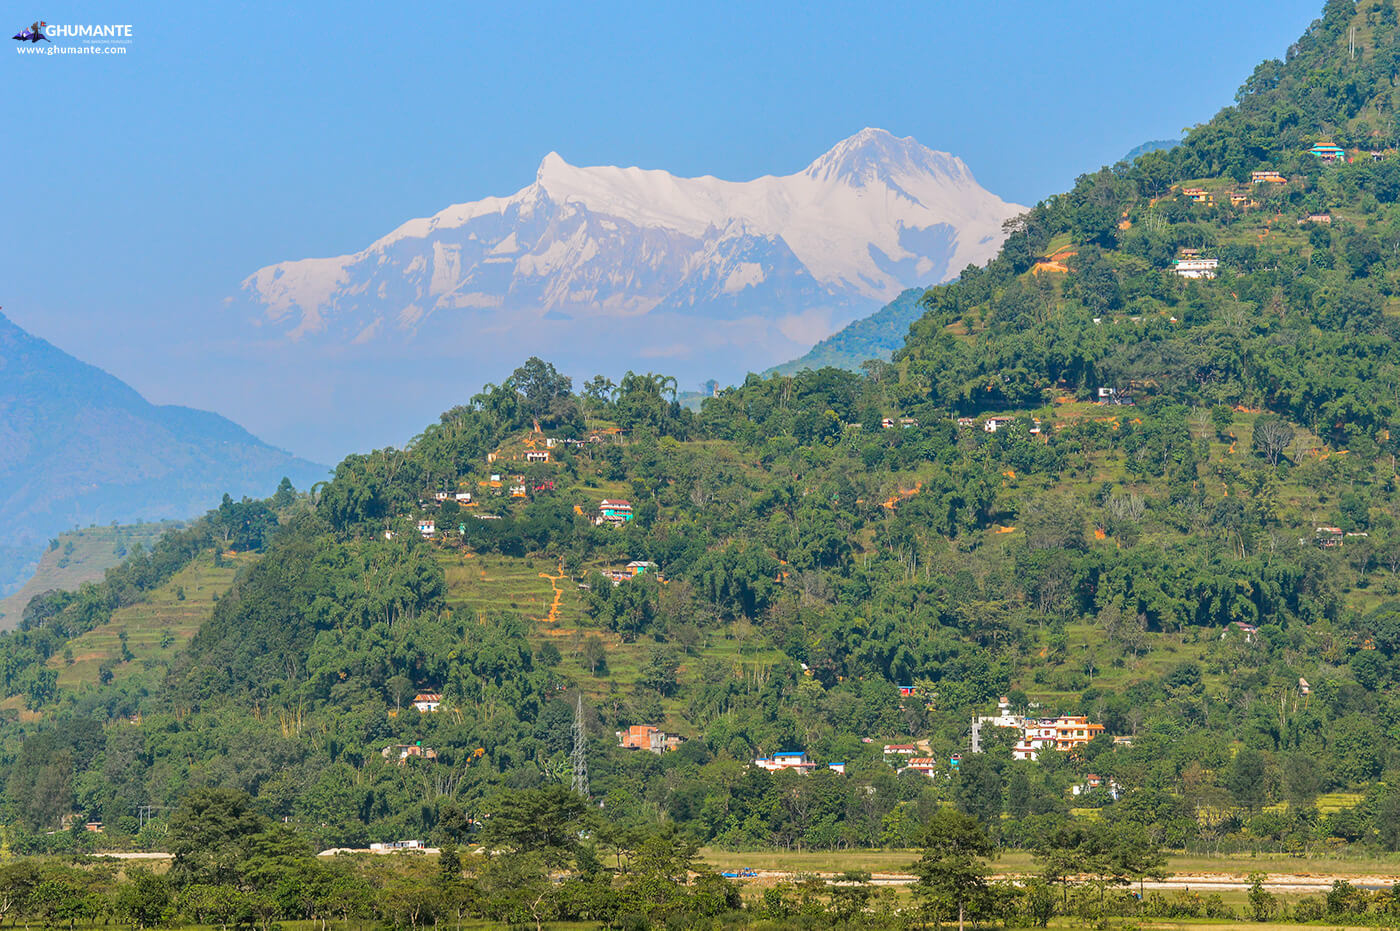 one of the village of waling with the Annapurna II & IV as seen in backdrop